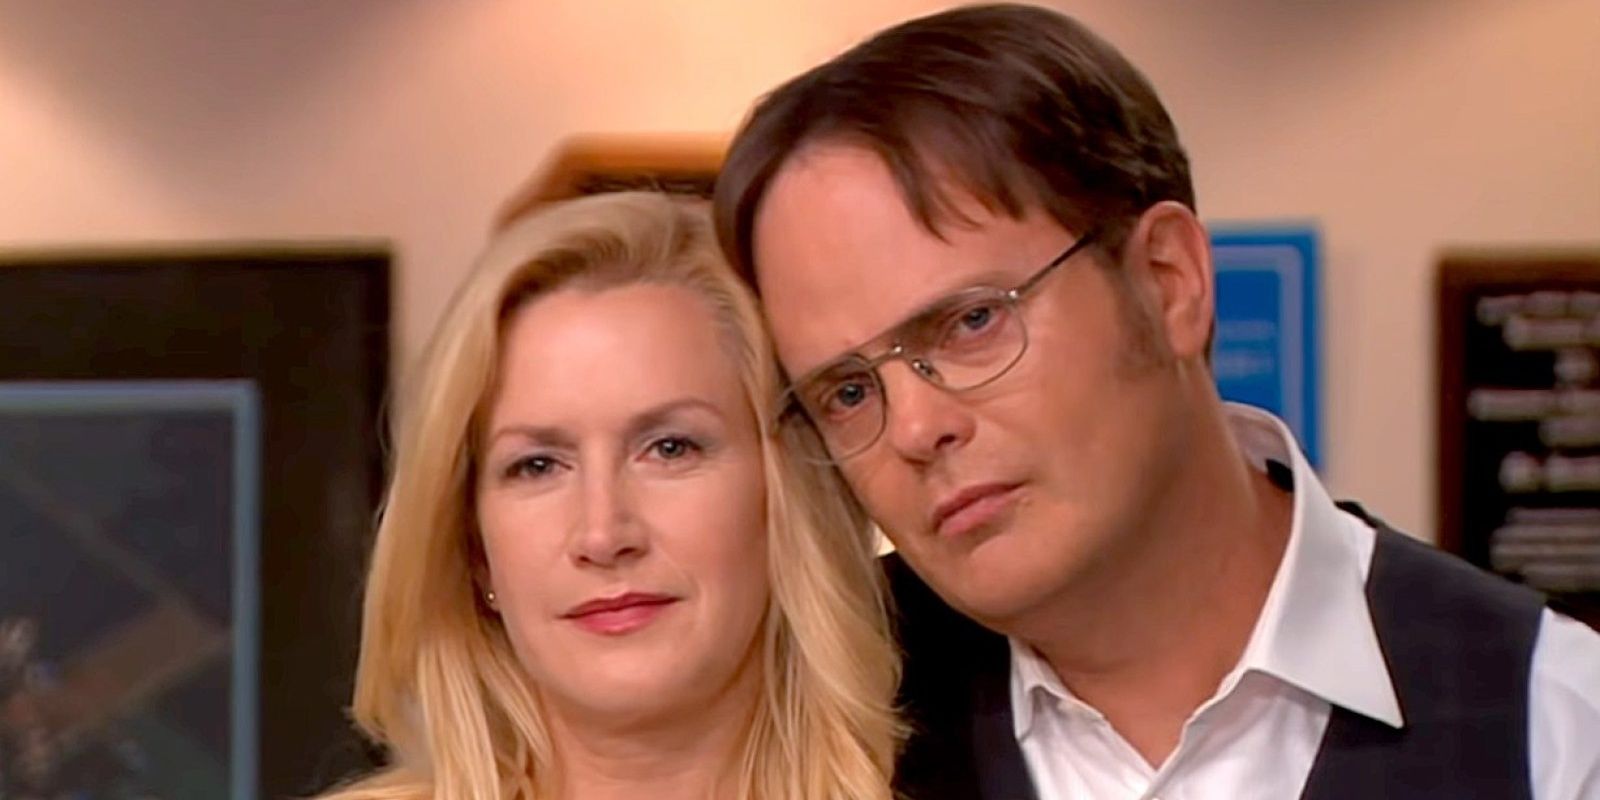 Dwight and Angela in the series finale of The office